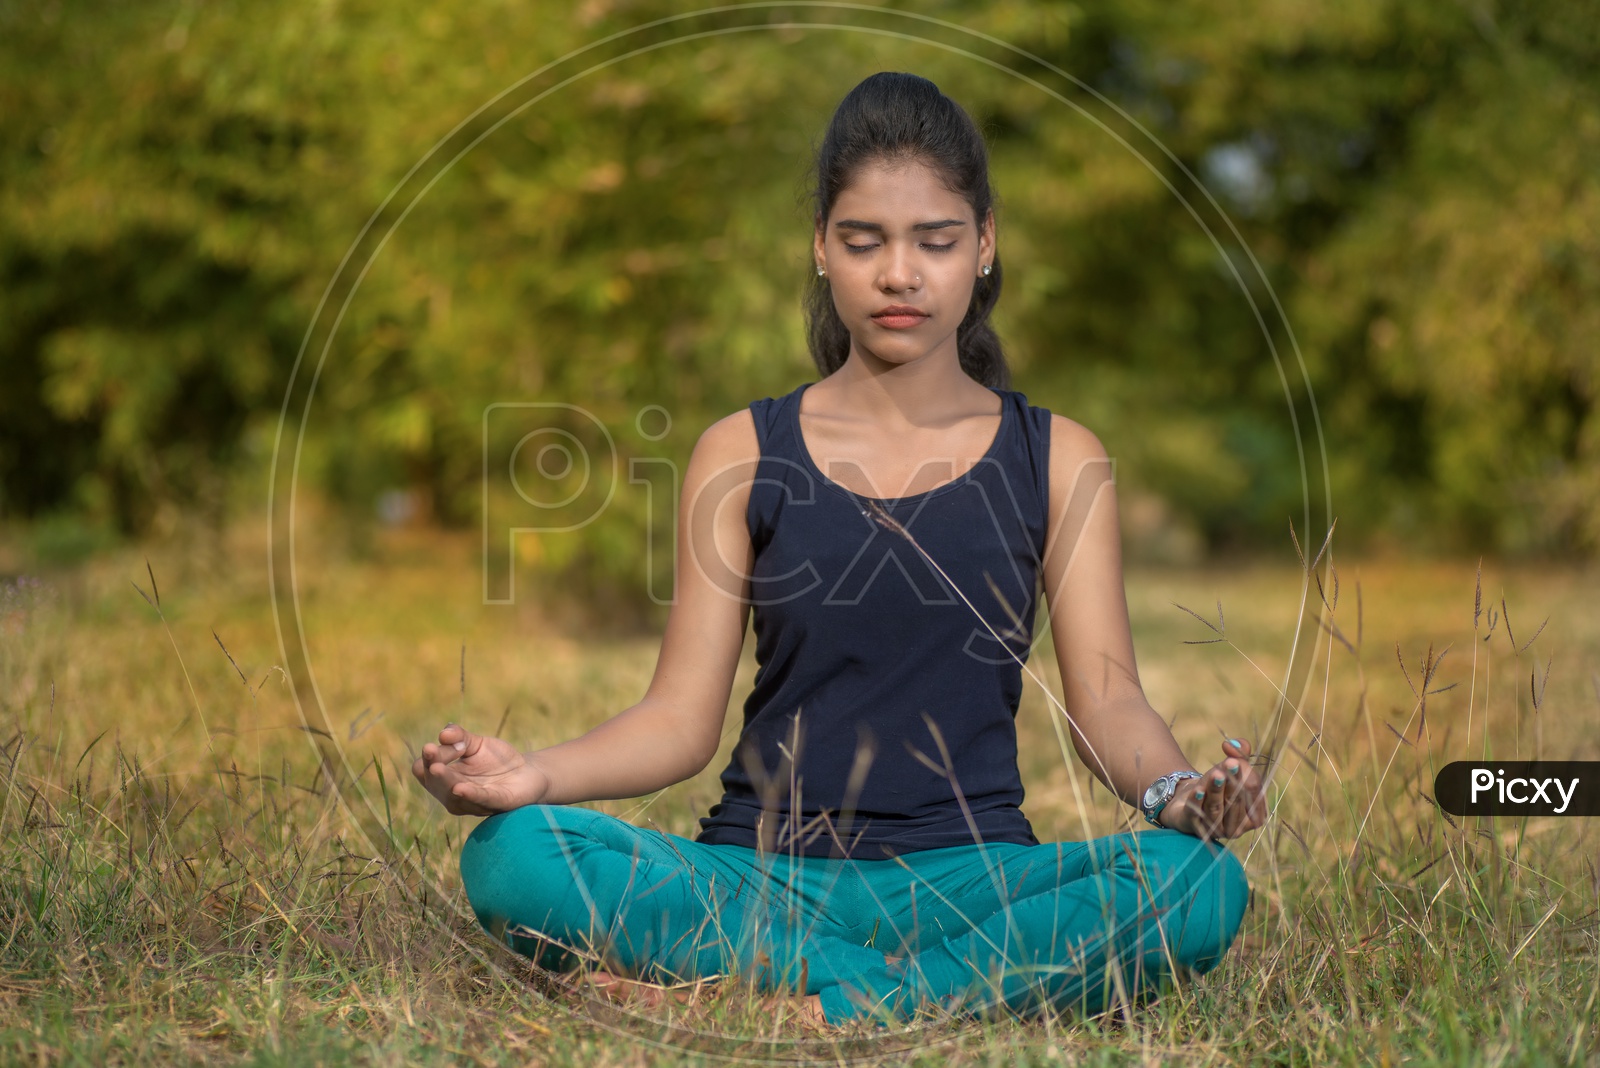 Woman Doing Doing Yoga  in Outdoor nature backdrop  meditation exercising  fitness concept relaxing in nature